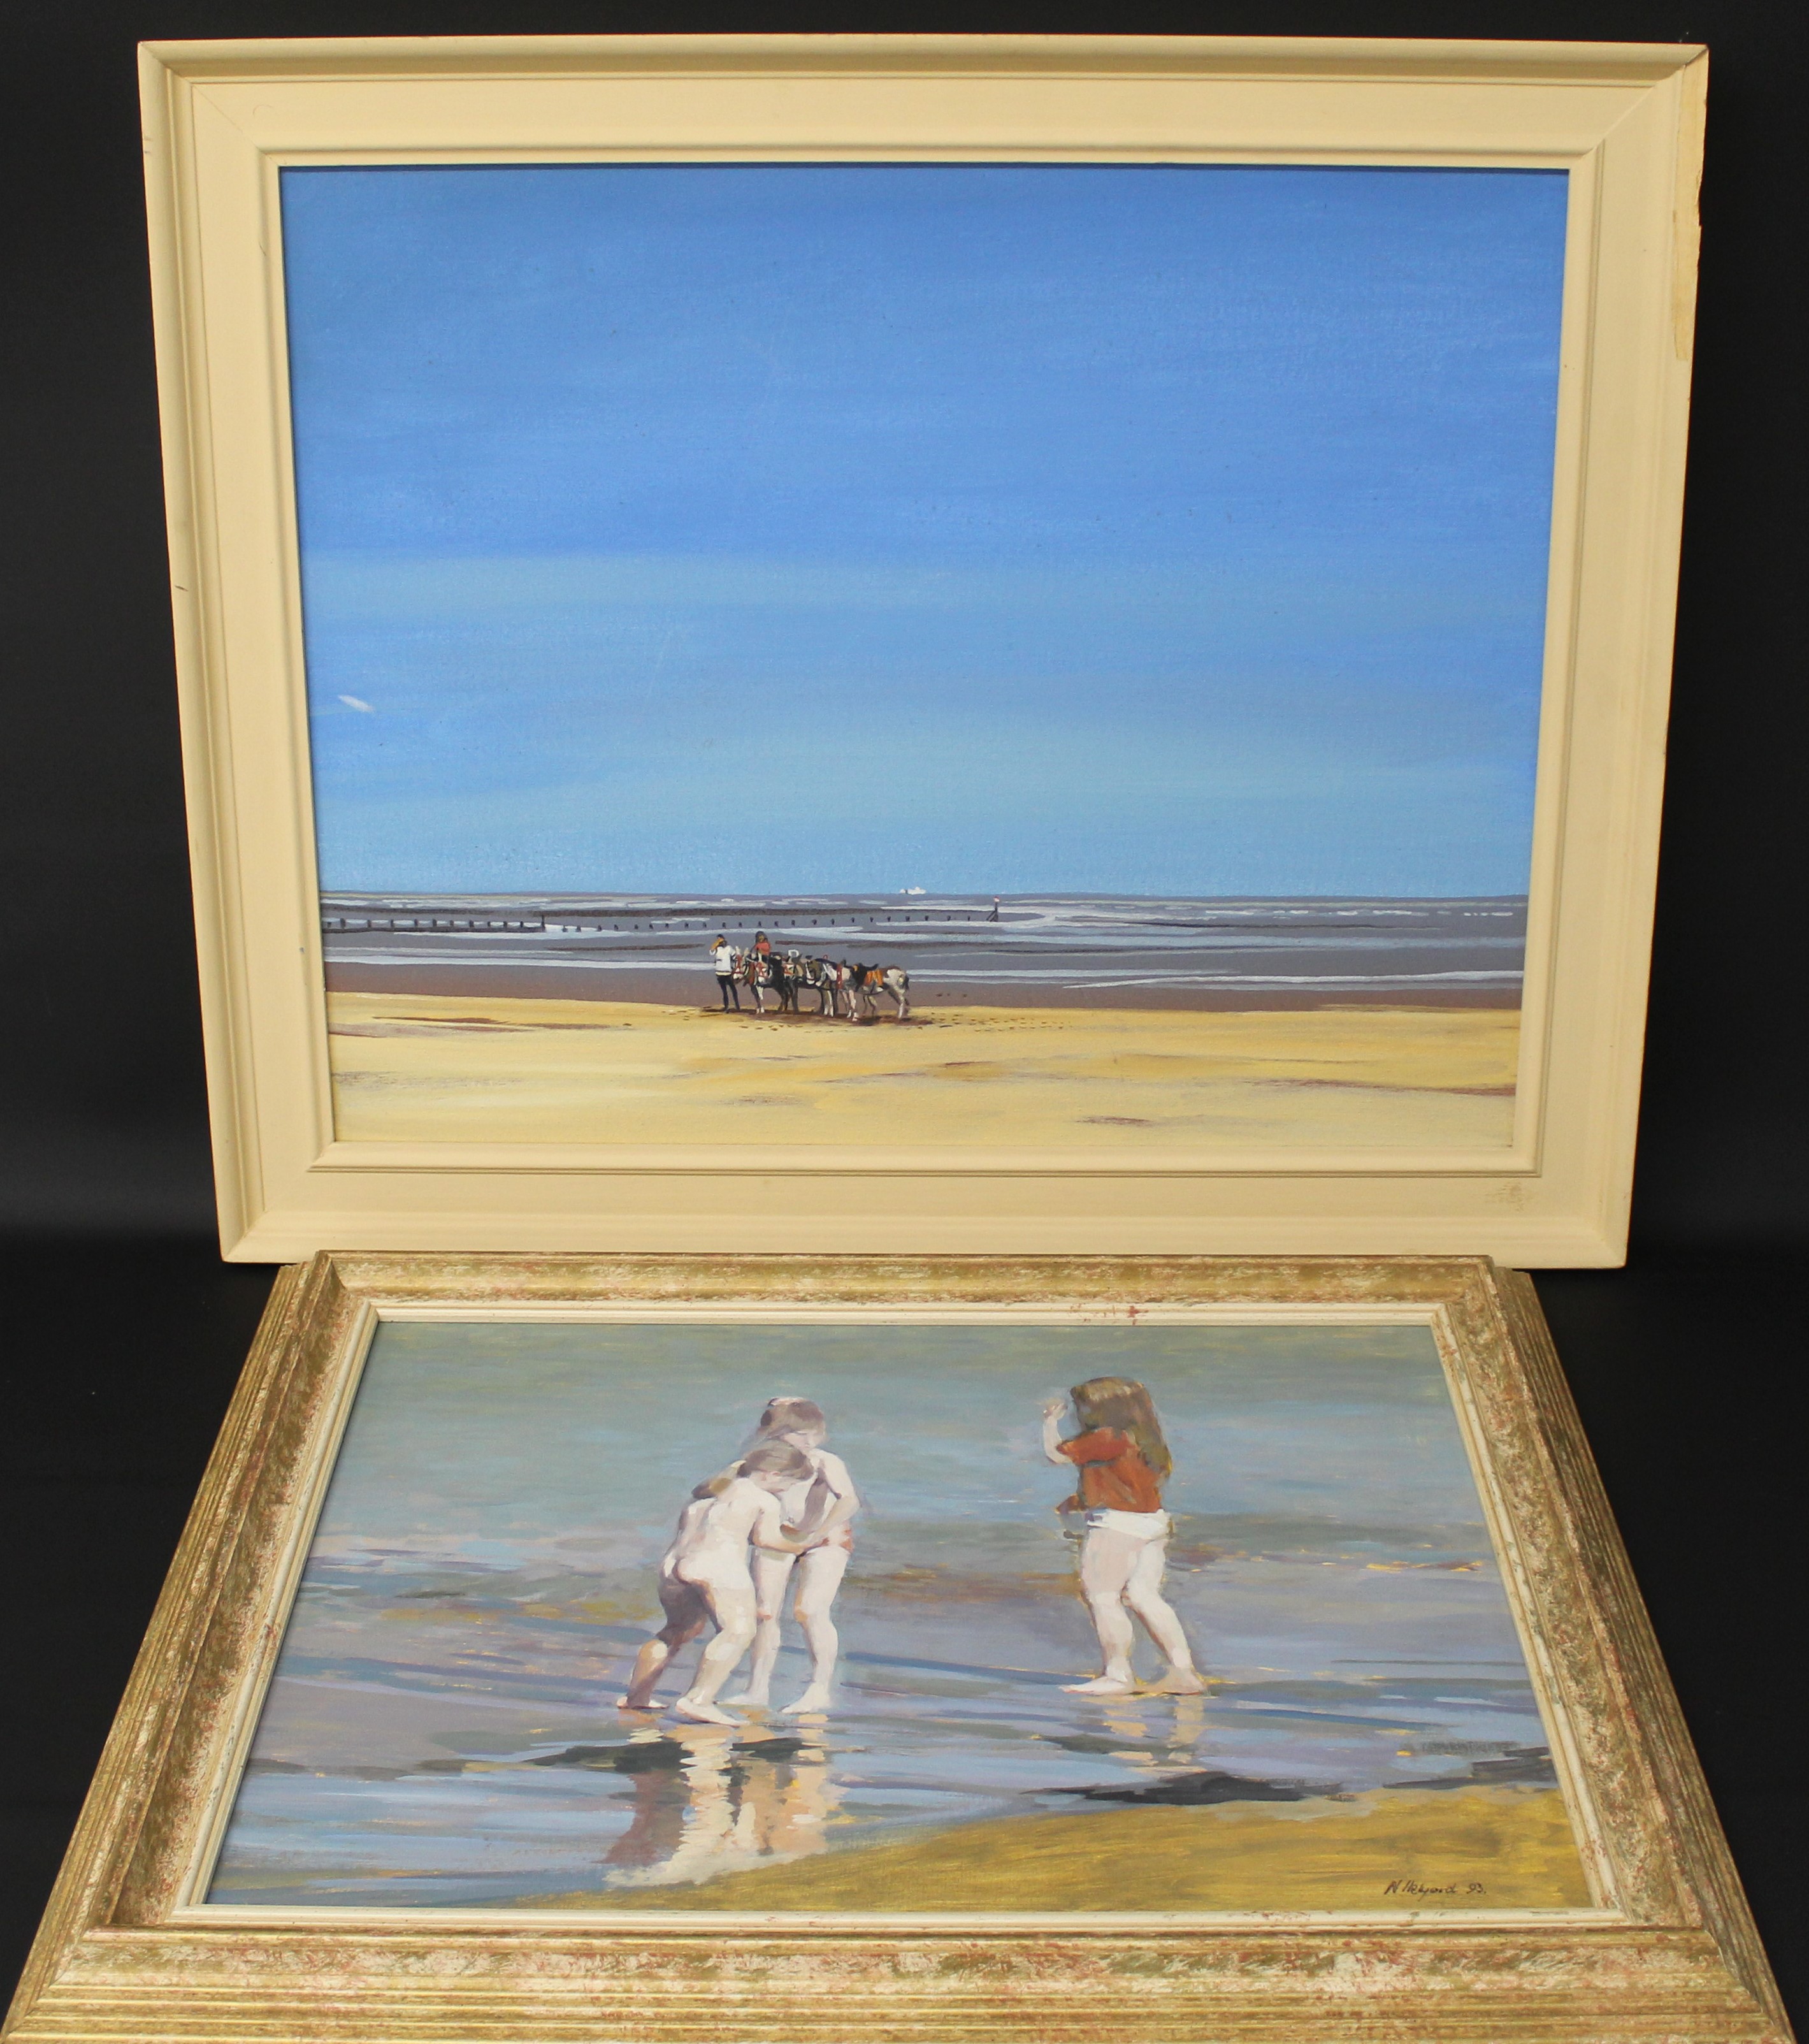 Oil on canvas "Donkeys" by Gervase Elwes 70cm x 58.9cm & oil on board "Collecting Water" by Neil